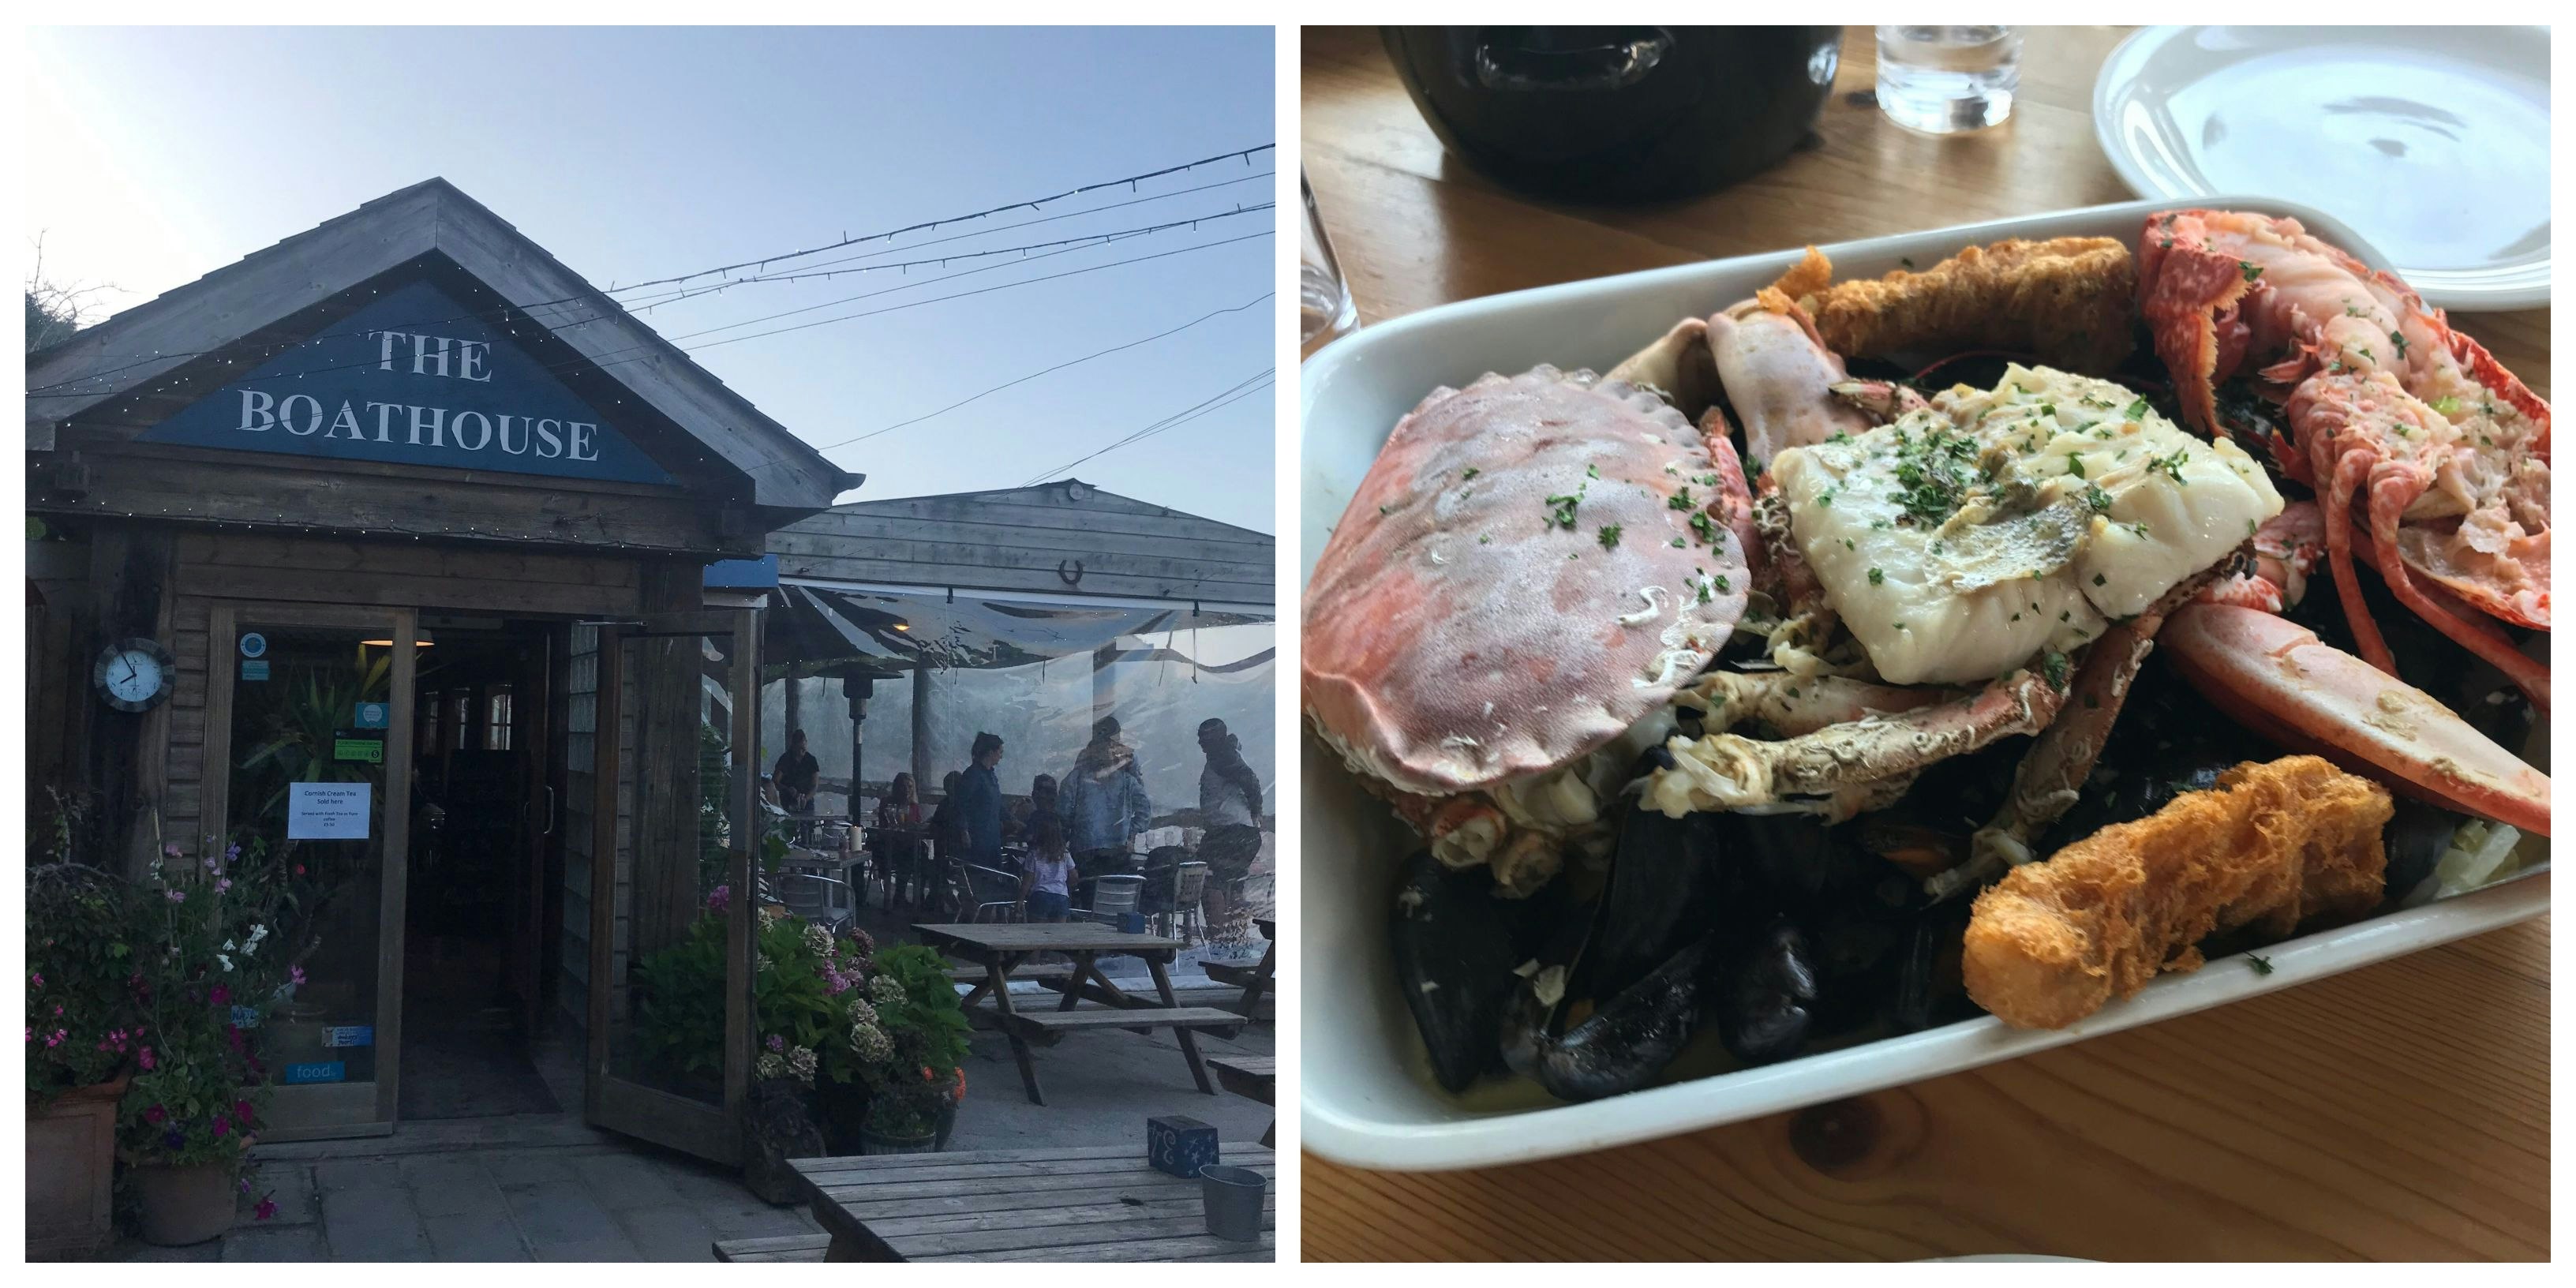 On the right, the wooden facade of the The Boathouse pub at dusk, on the right a close up of the seafood platter dinner